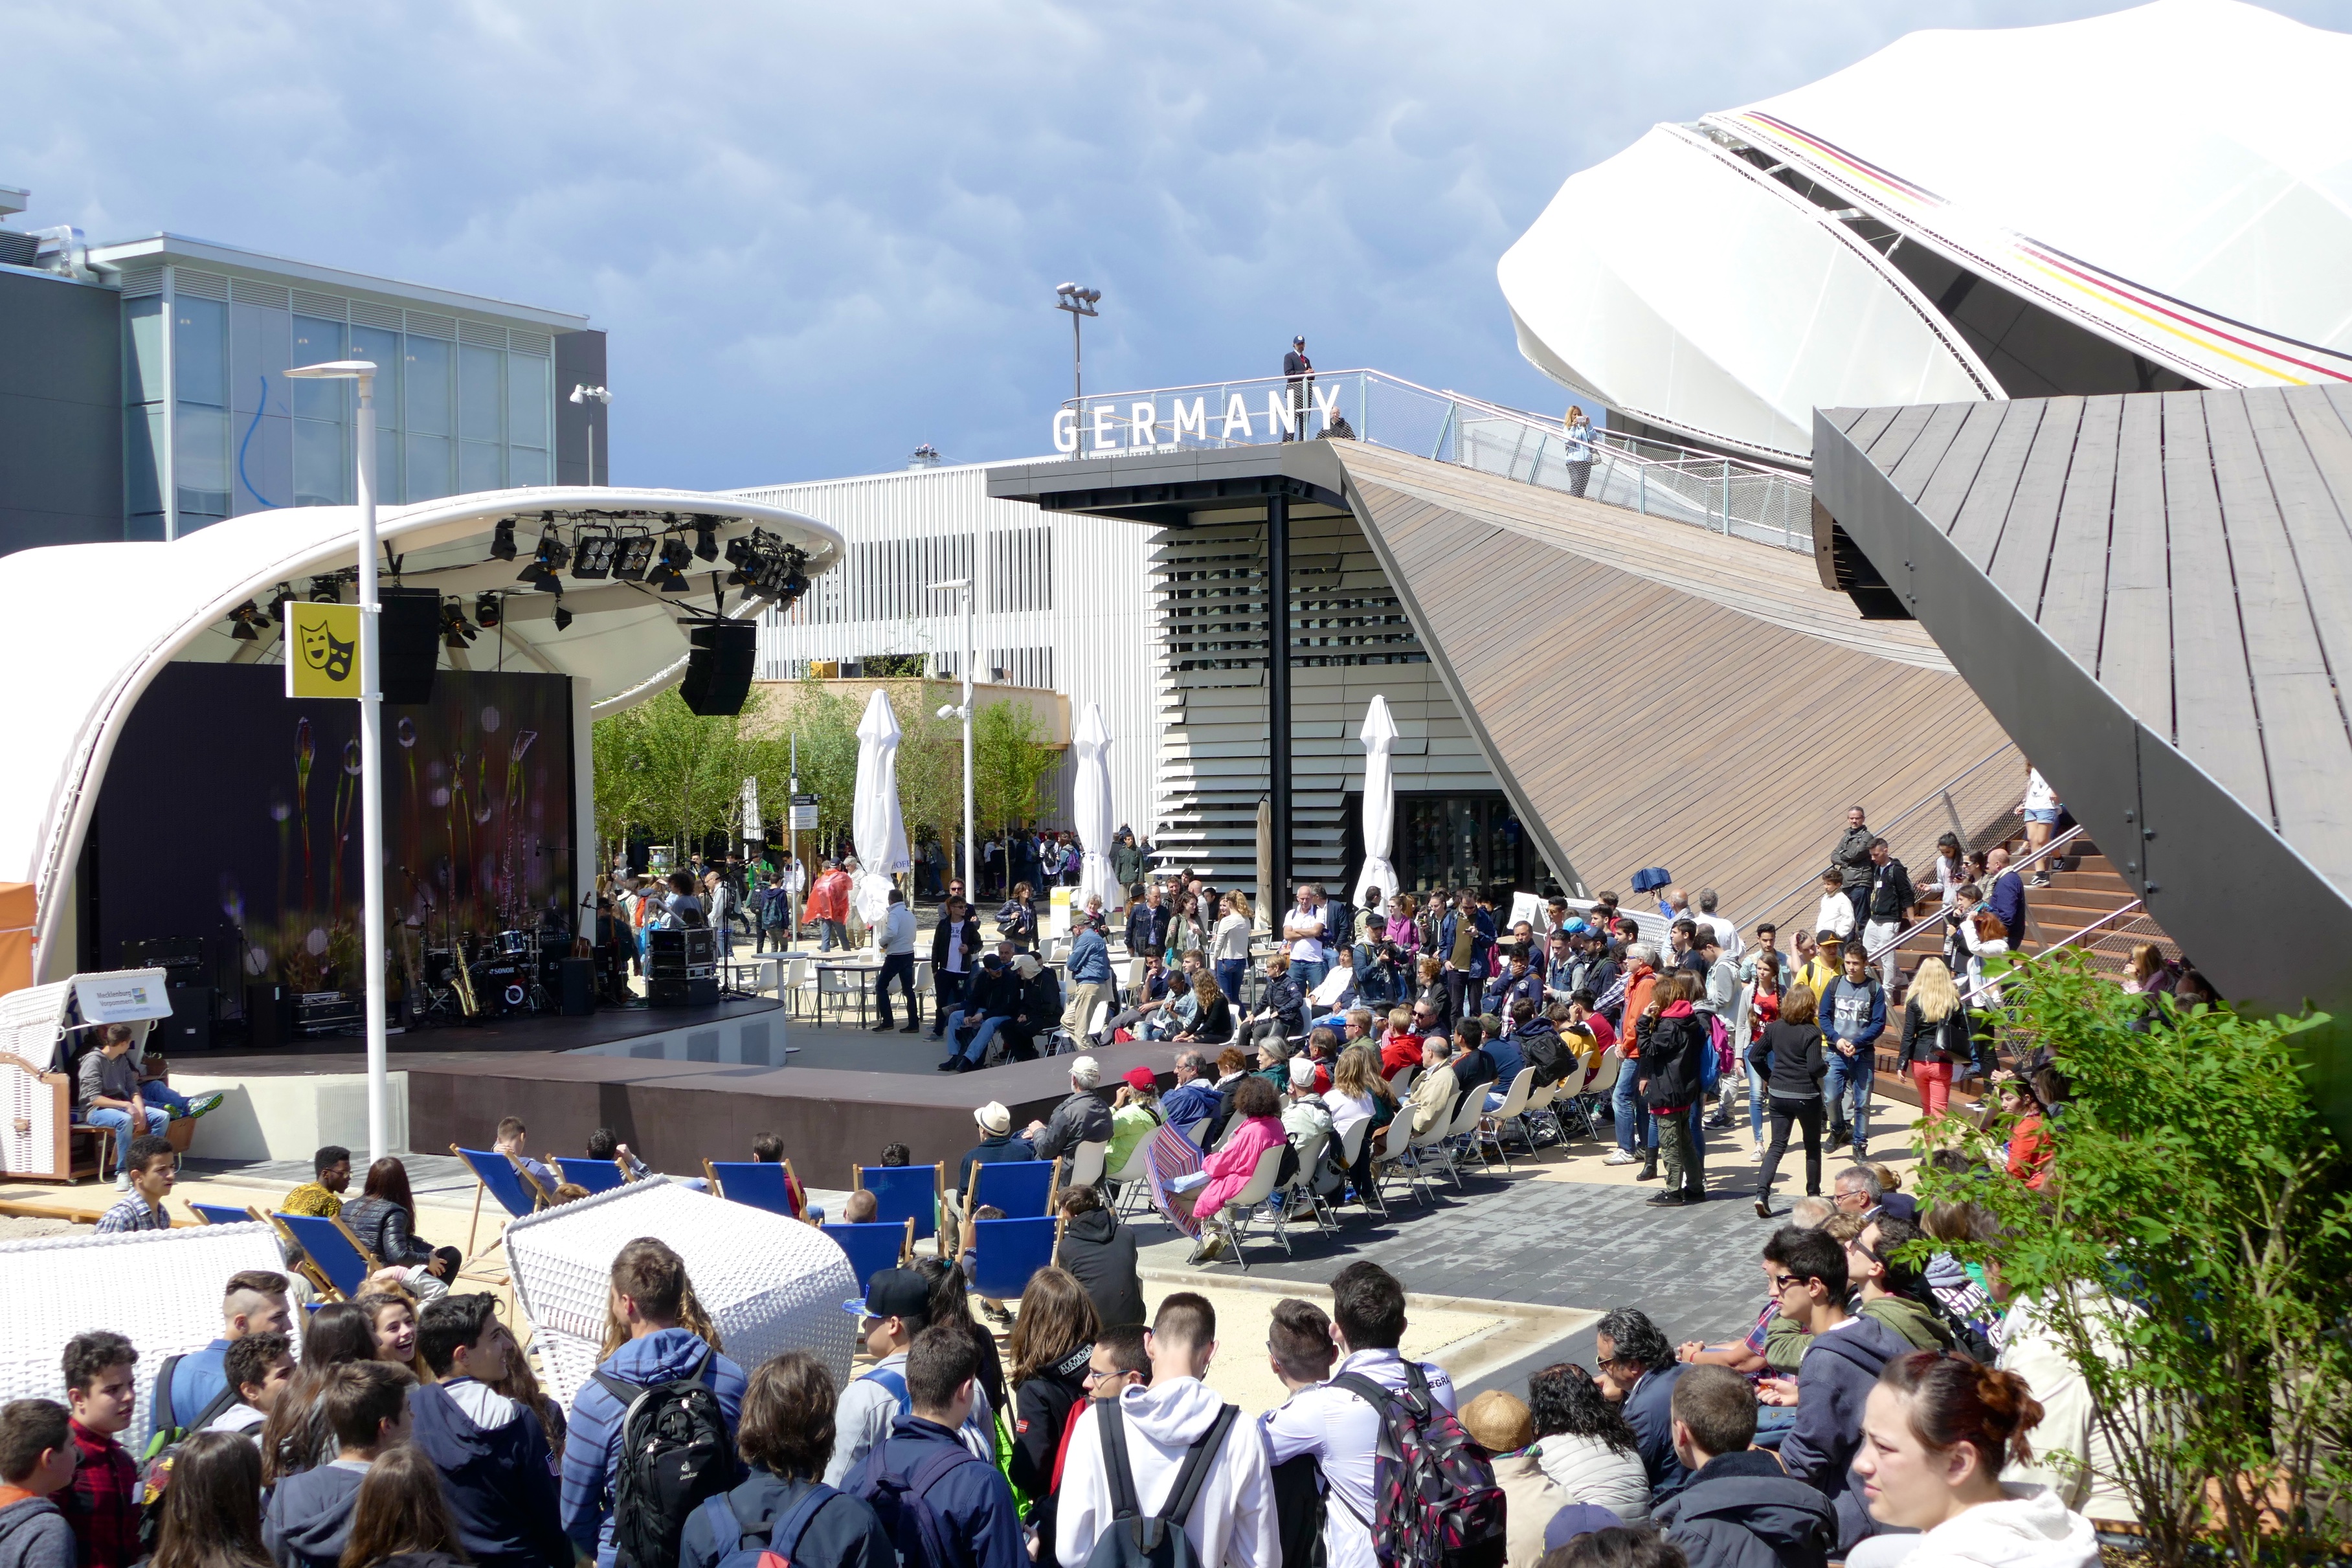 The German Pavilion at the Expo 2015